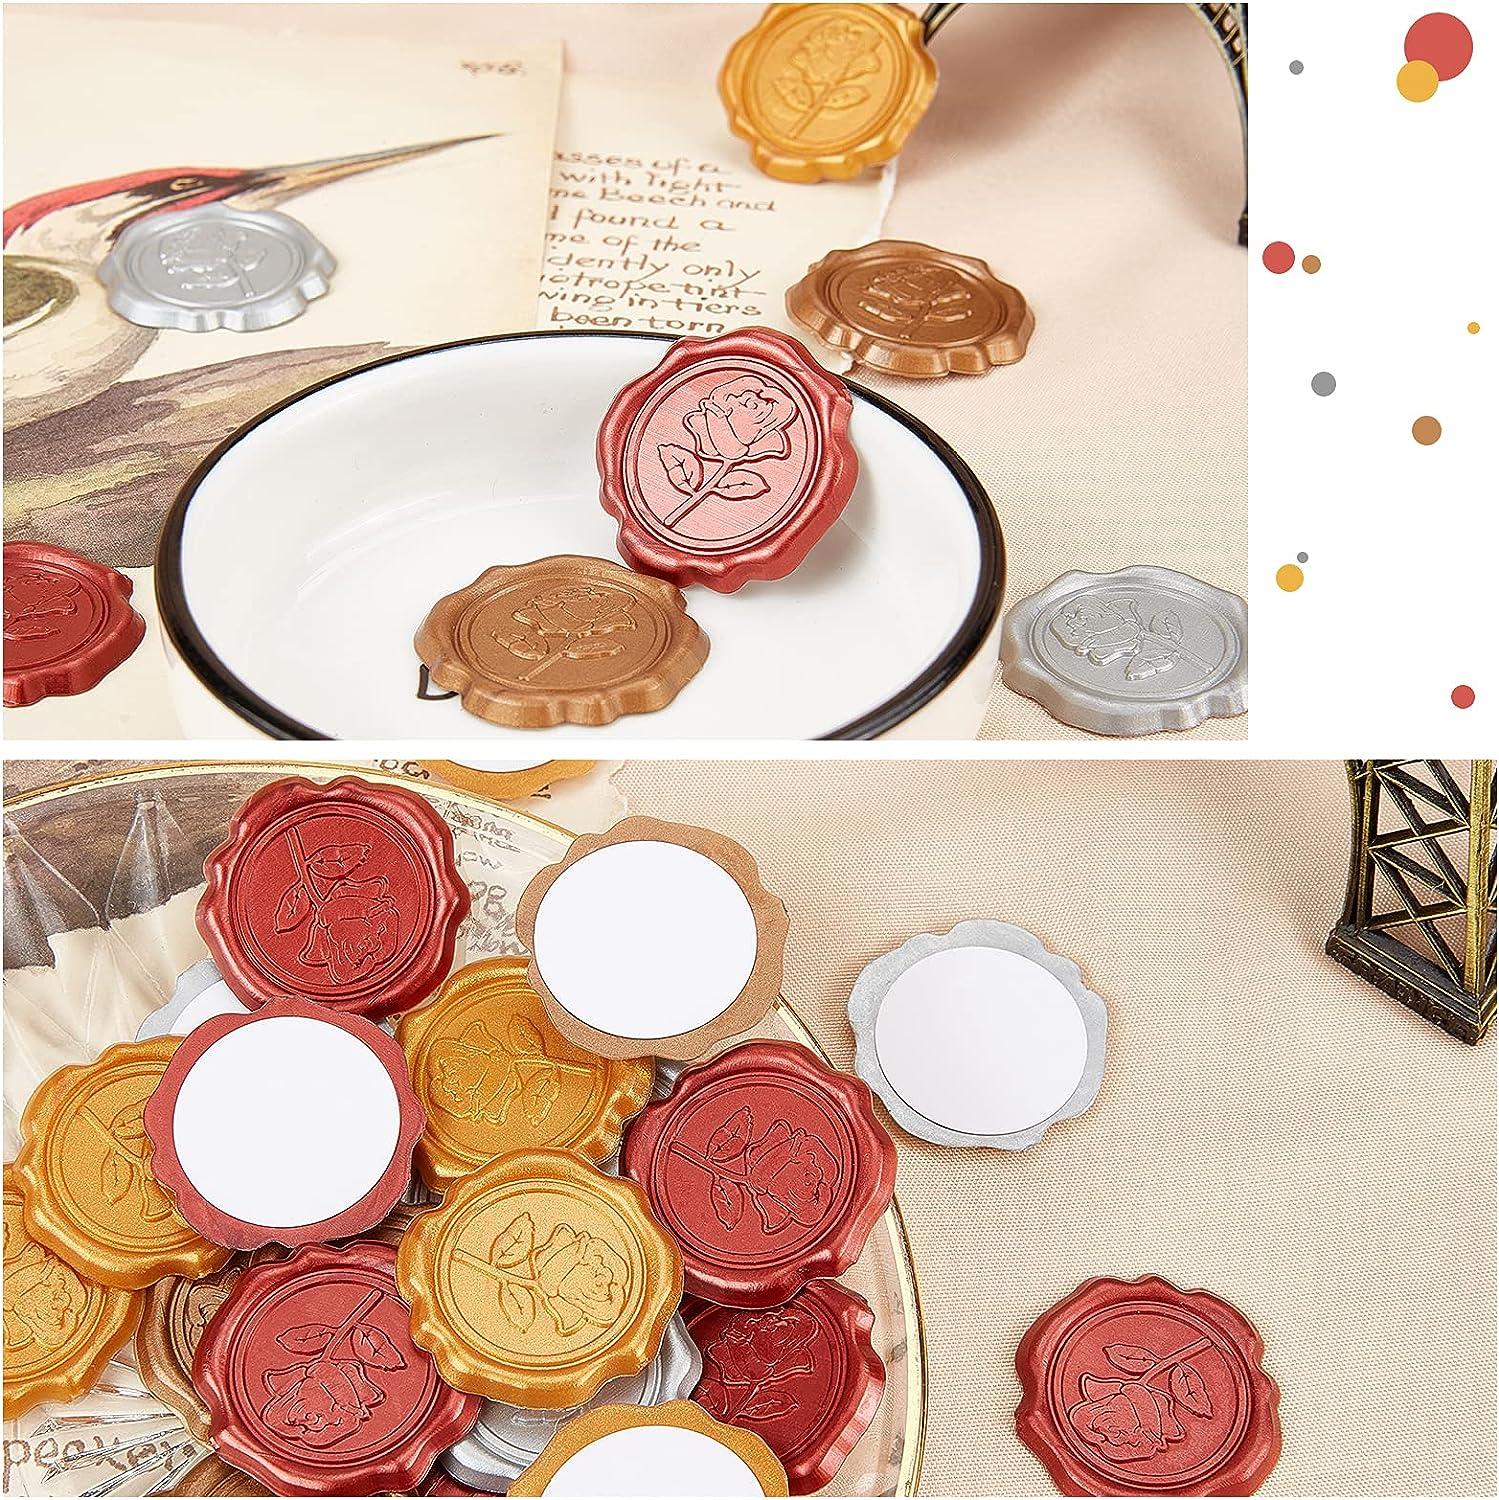 CRASPIRE Adhesive Wax Seal Stickers 25PCS Red Rose Wax Seal Sticker for  Envelopes Decorative Stamp Stickers